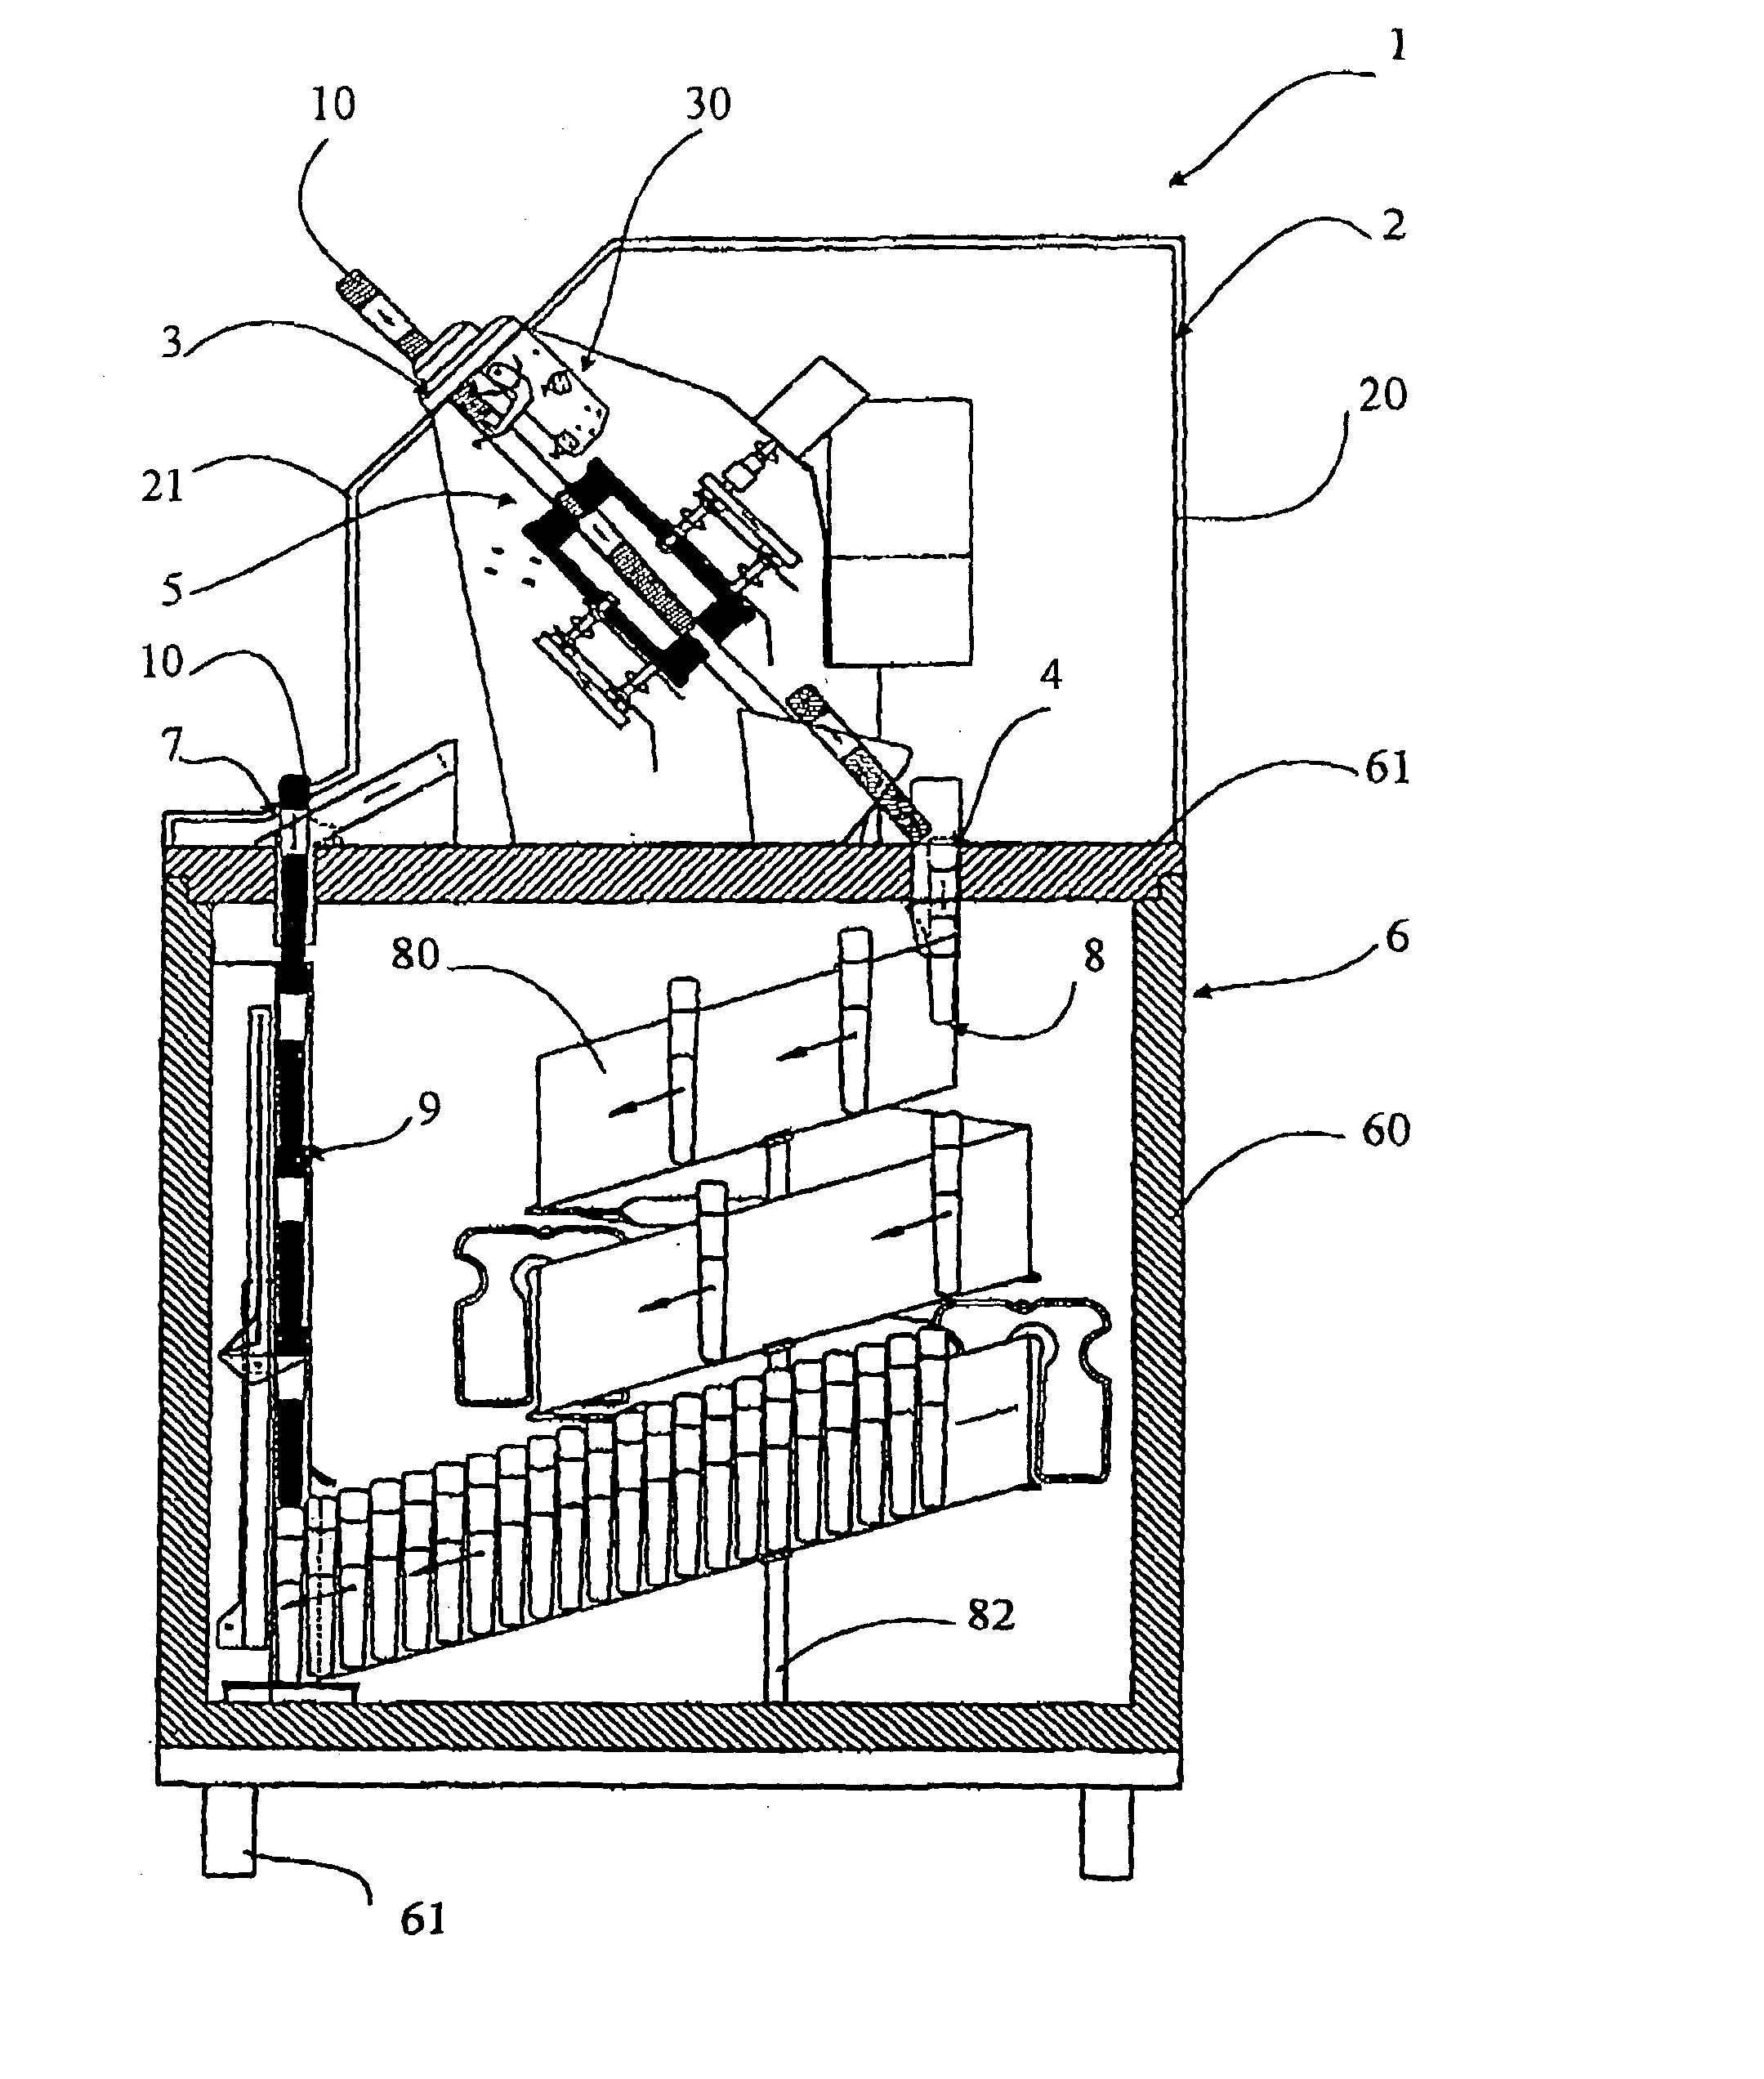 Apparatus dispensing rechargeable refrigerating elements